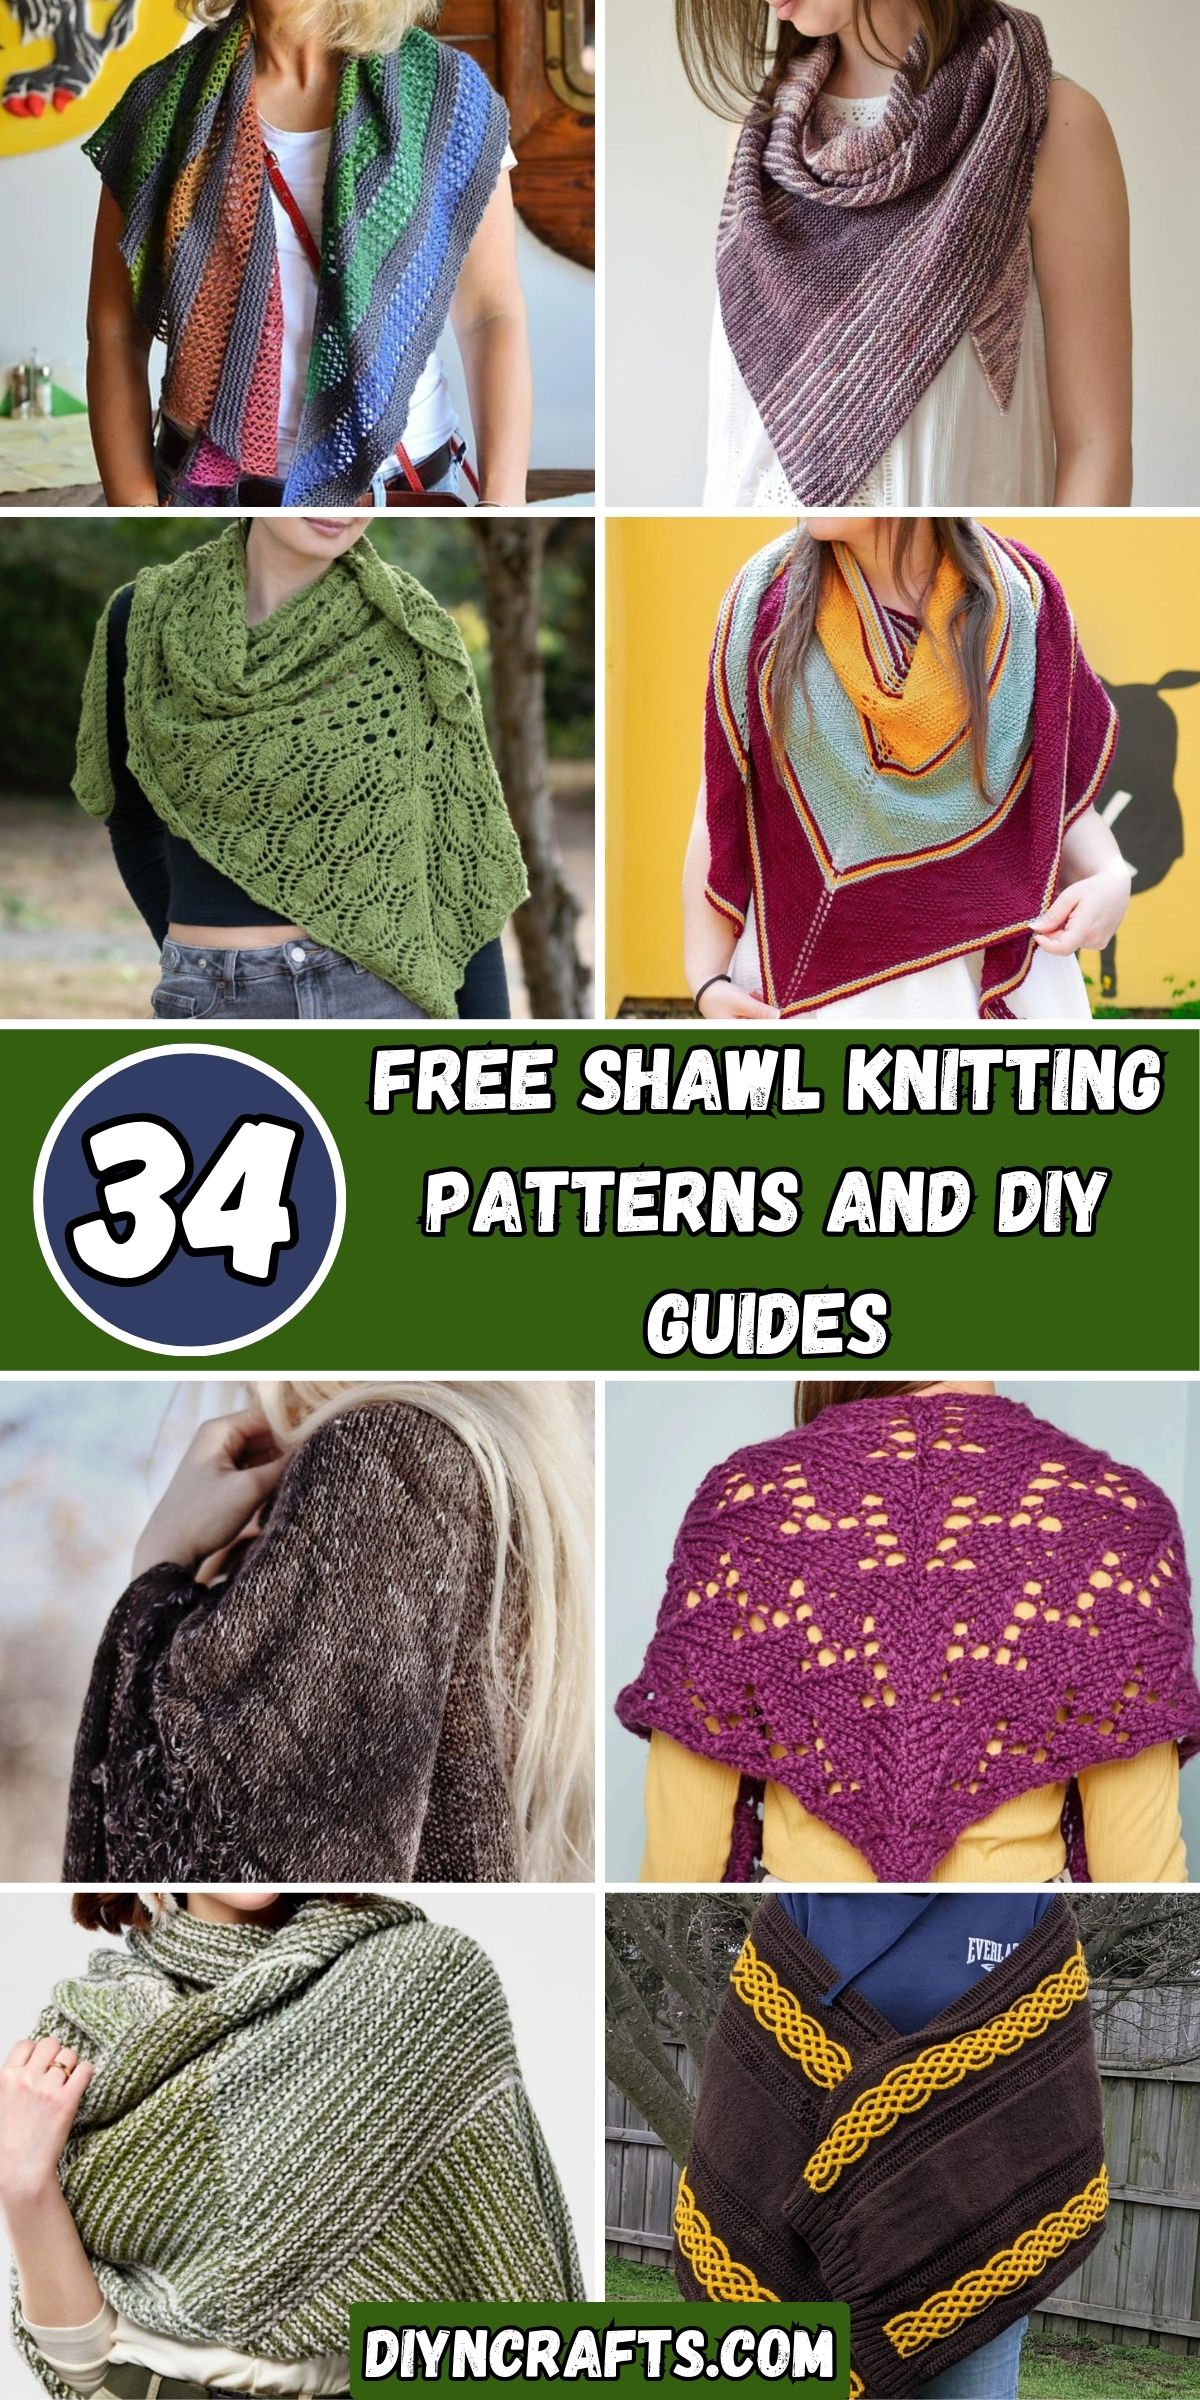 34 Free Shawl Knitting Patterns and DIY Guides collage.